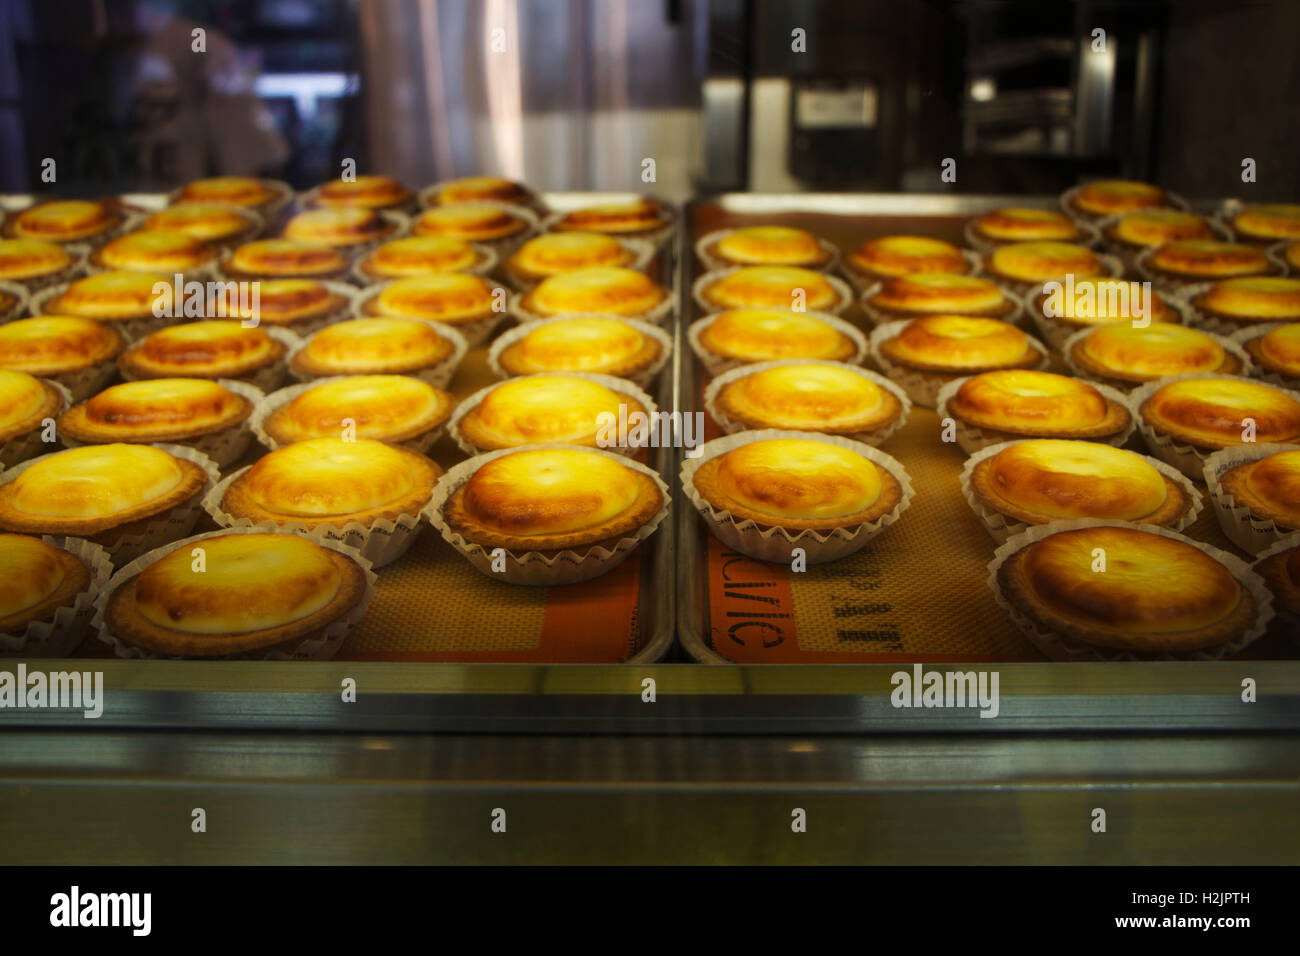 A BAKE Cheese Tart store in Tokyo. Stock Photo